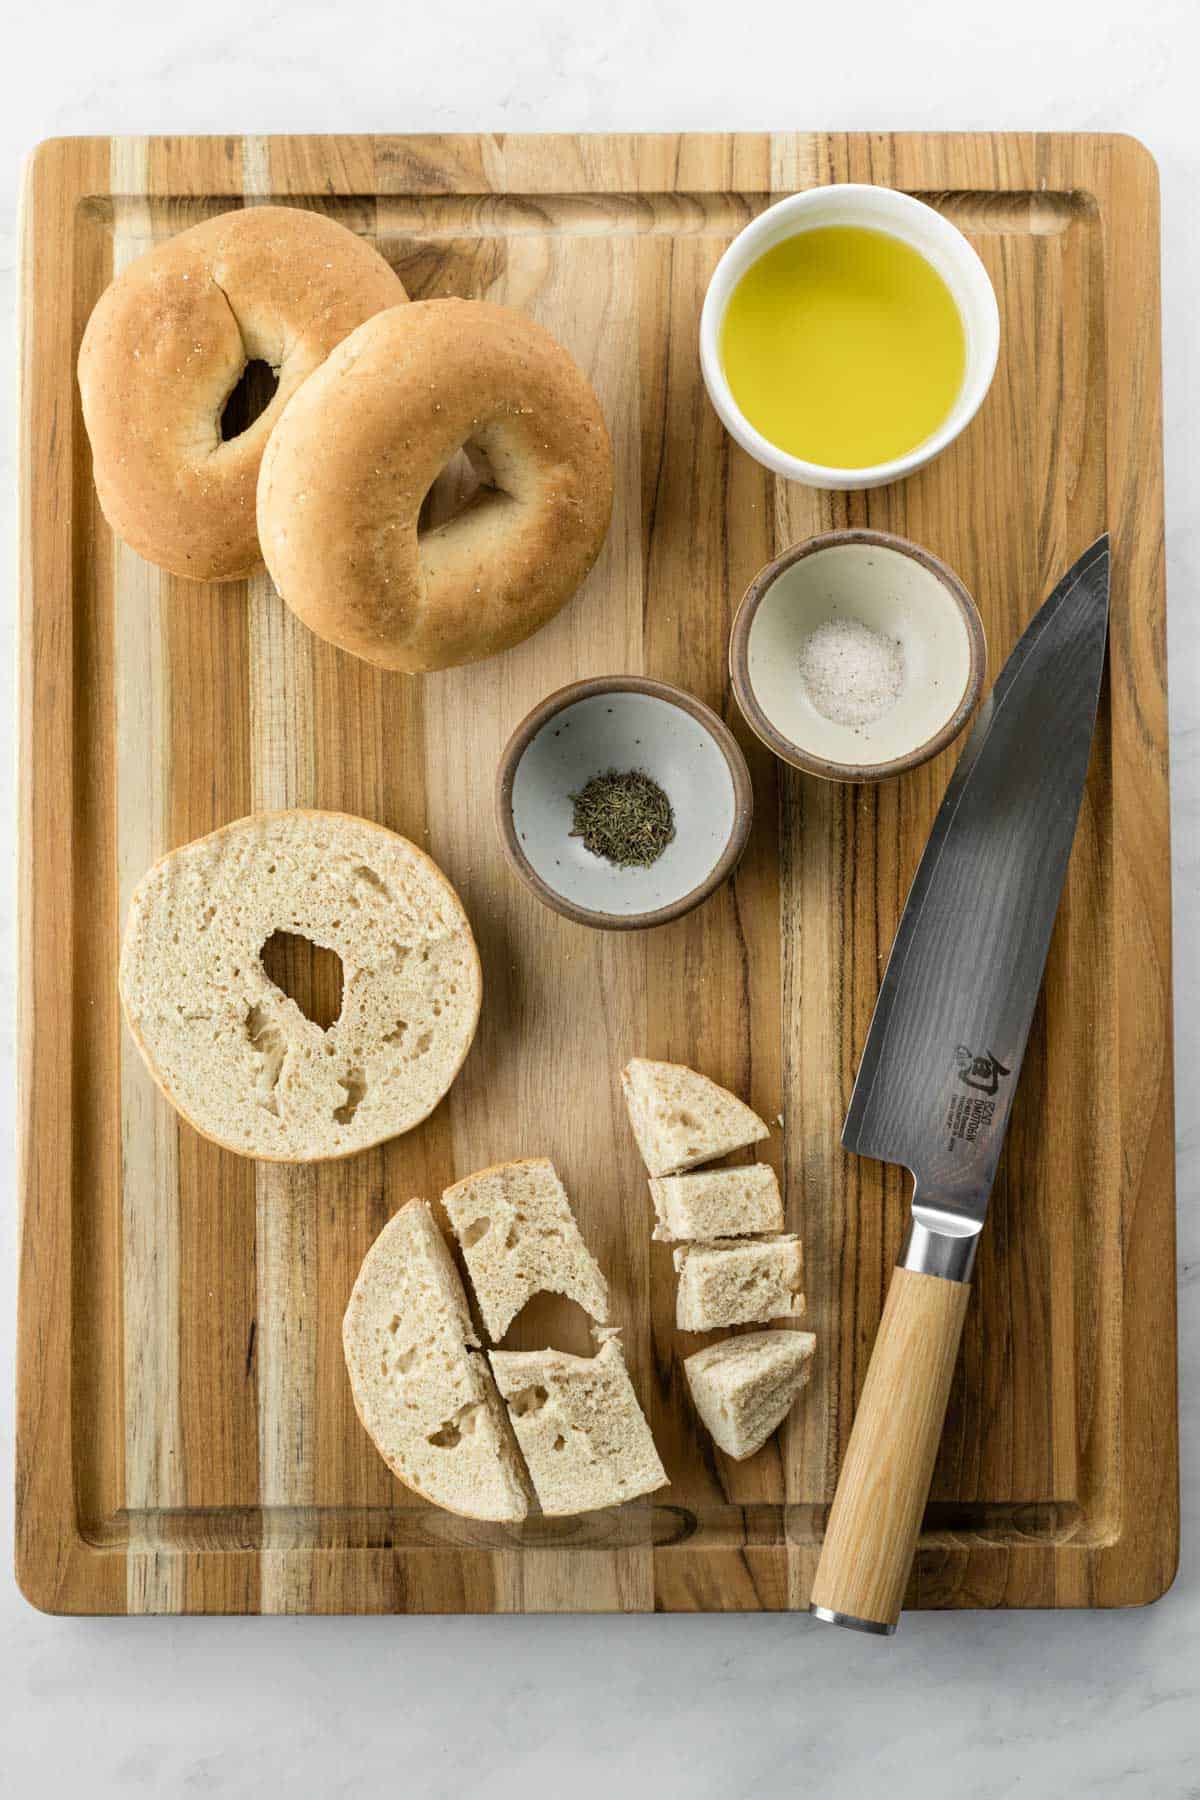 the ingredients needed to make croutons on a cutting board with a knife next to a cut bagel.